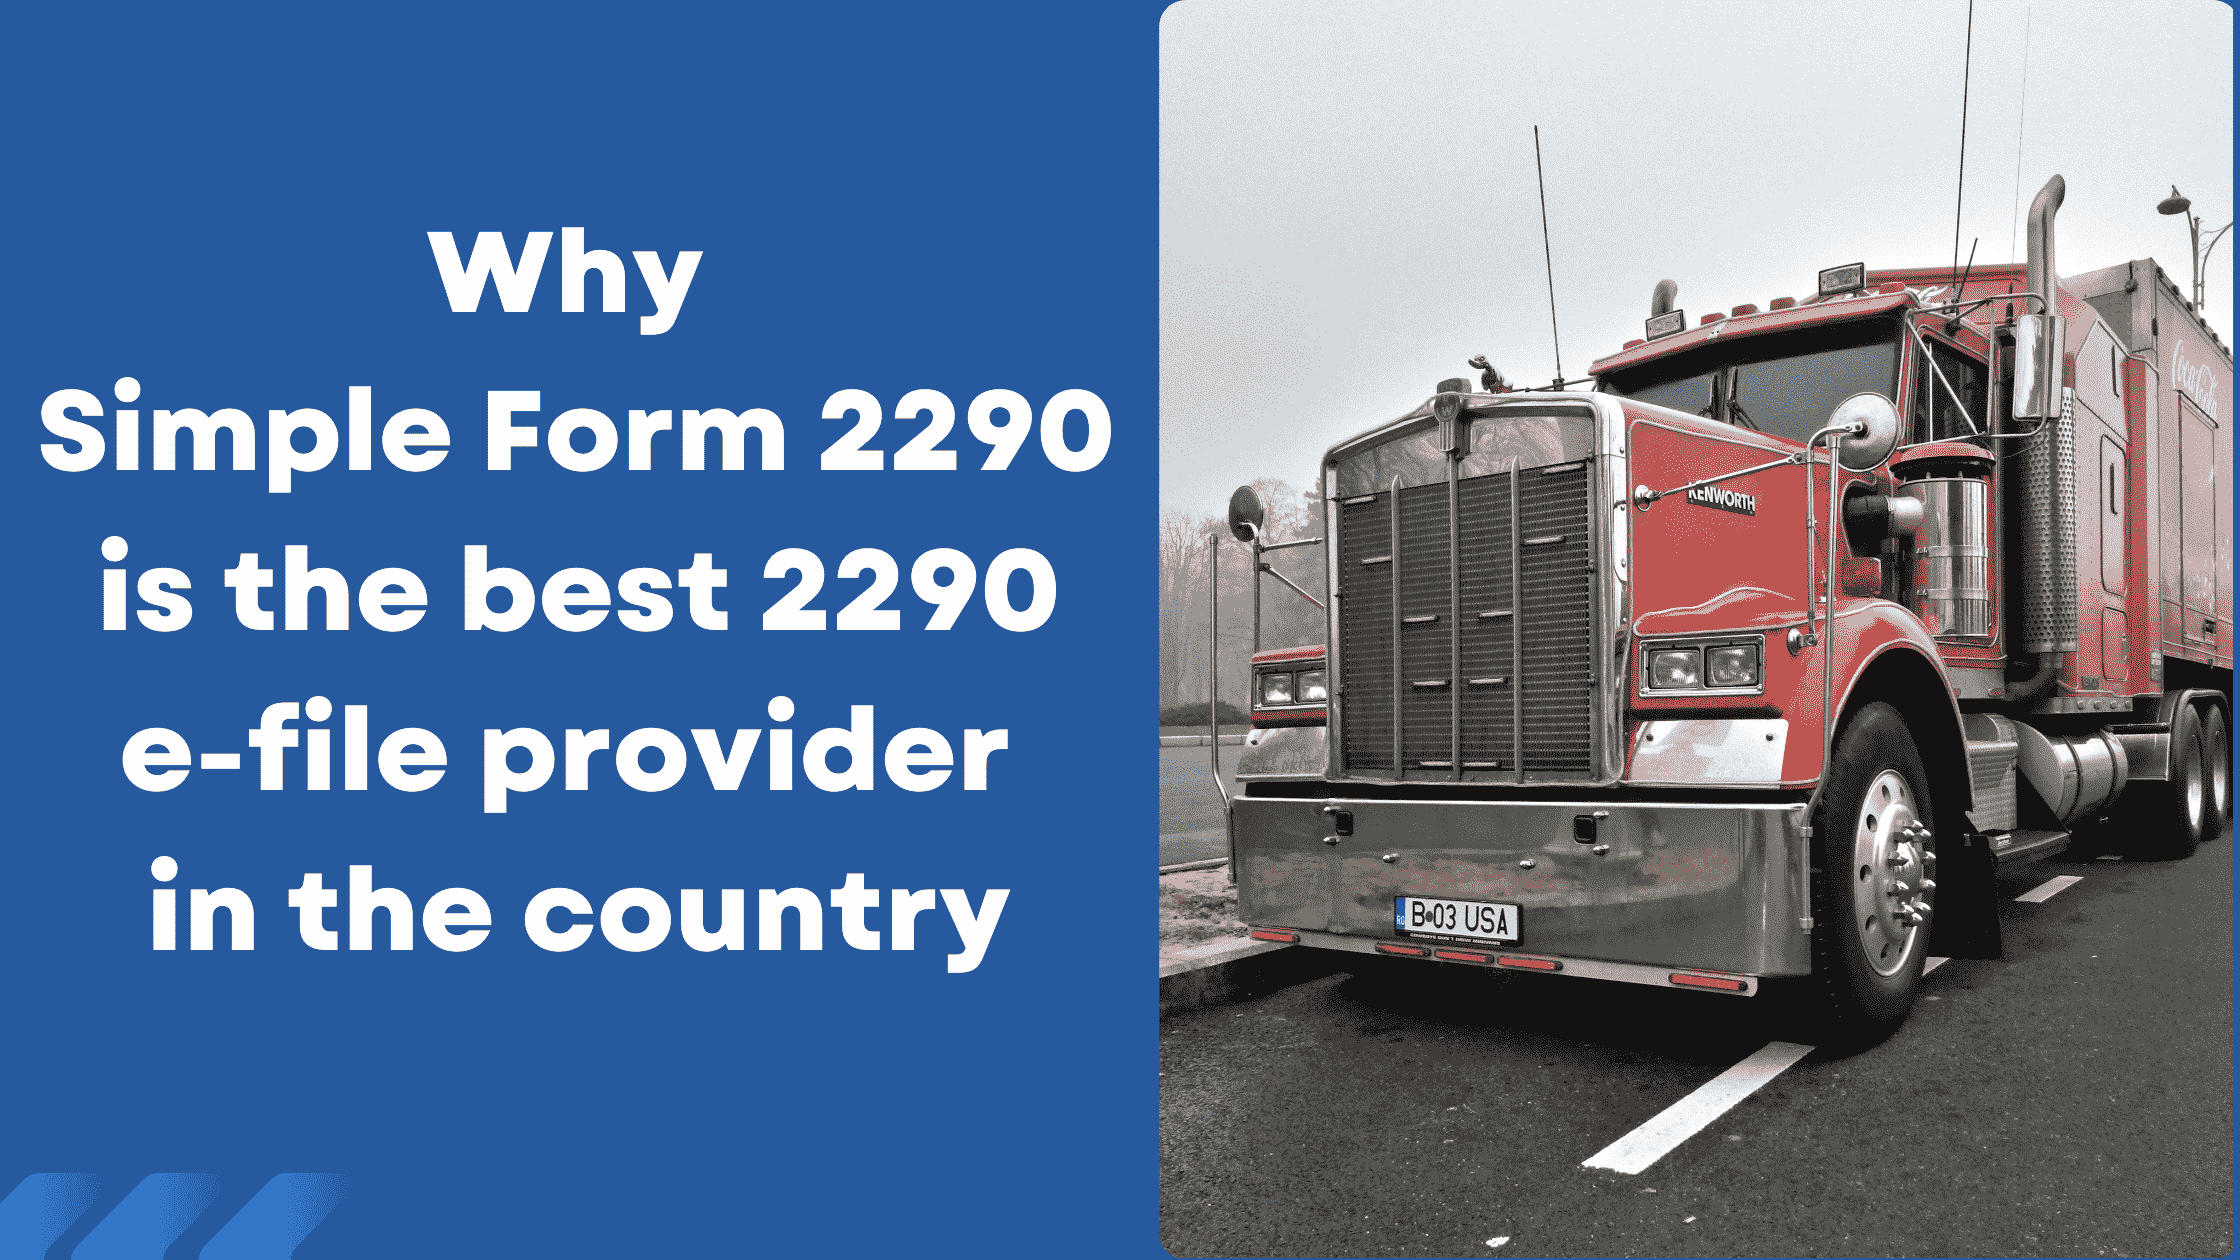 Why Simple Form 2290 is the Best 2290 efile Provider?